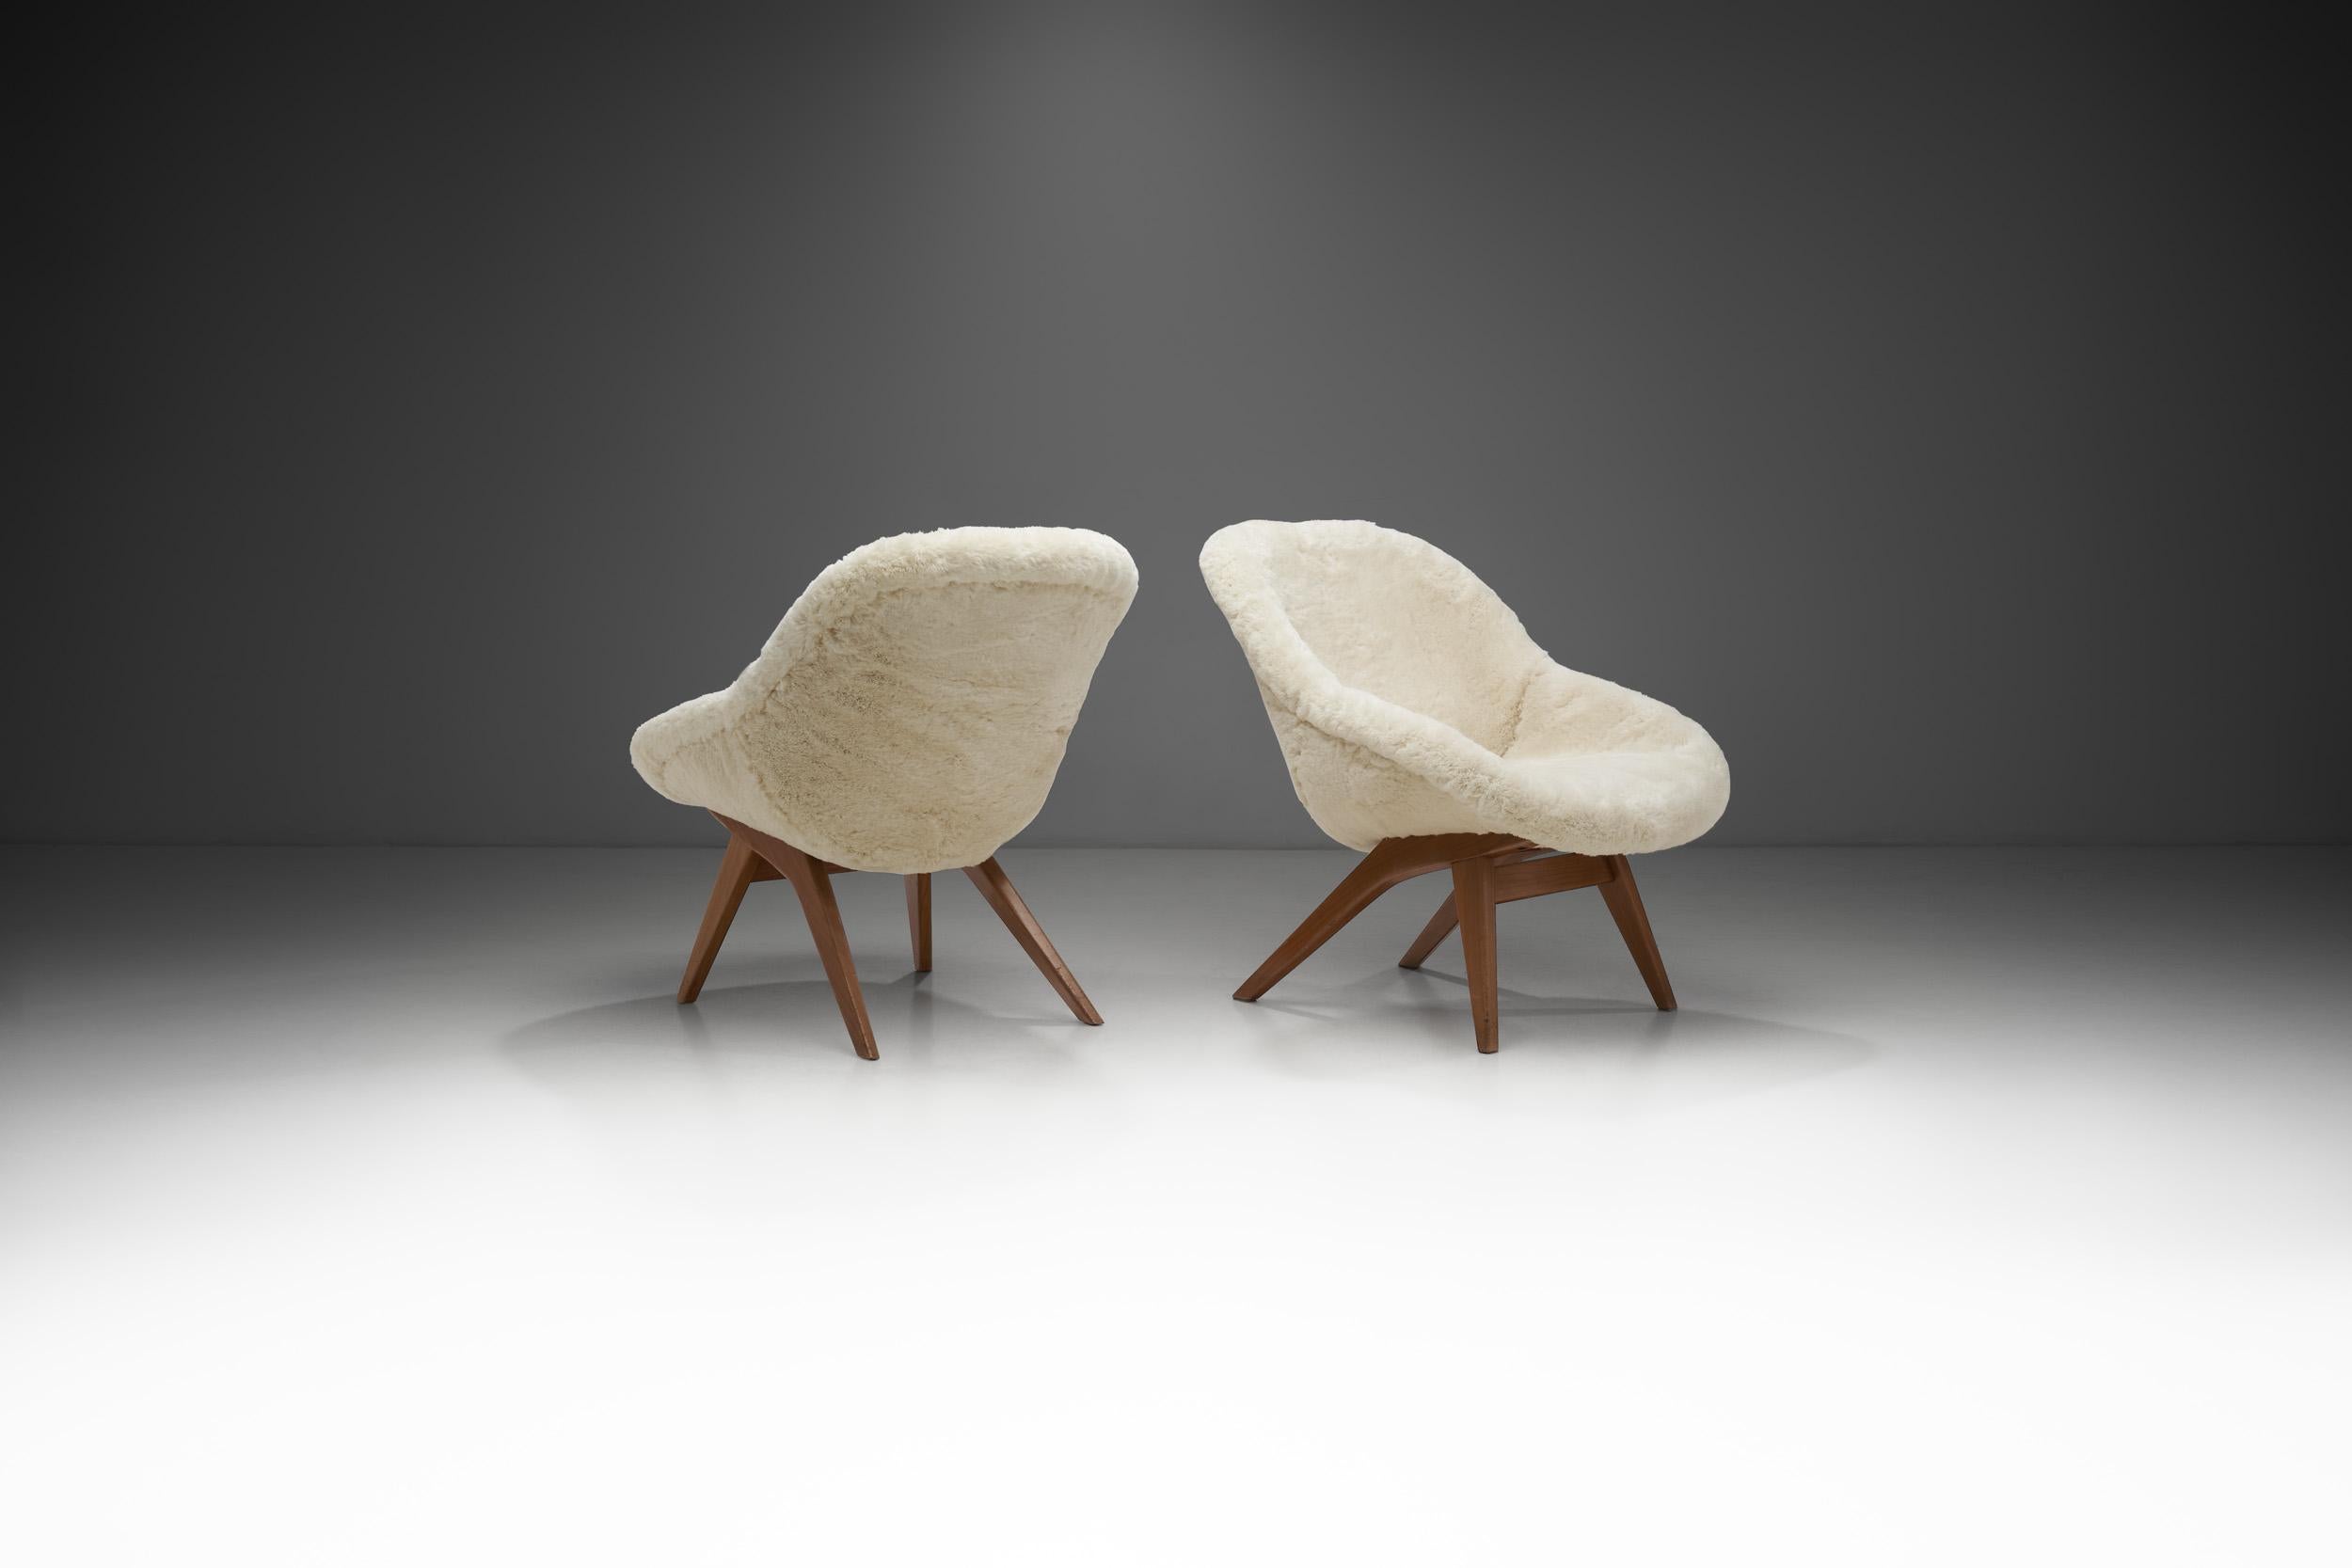 Wool European Mid-Century Modern Lounge Chairs with Tapered Legs, Europe circa 1950 For Sale